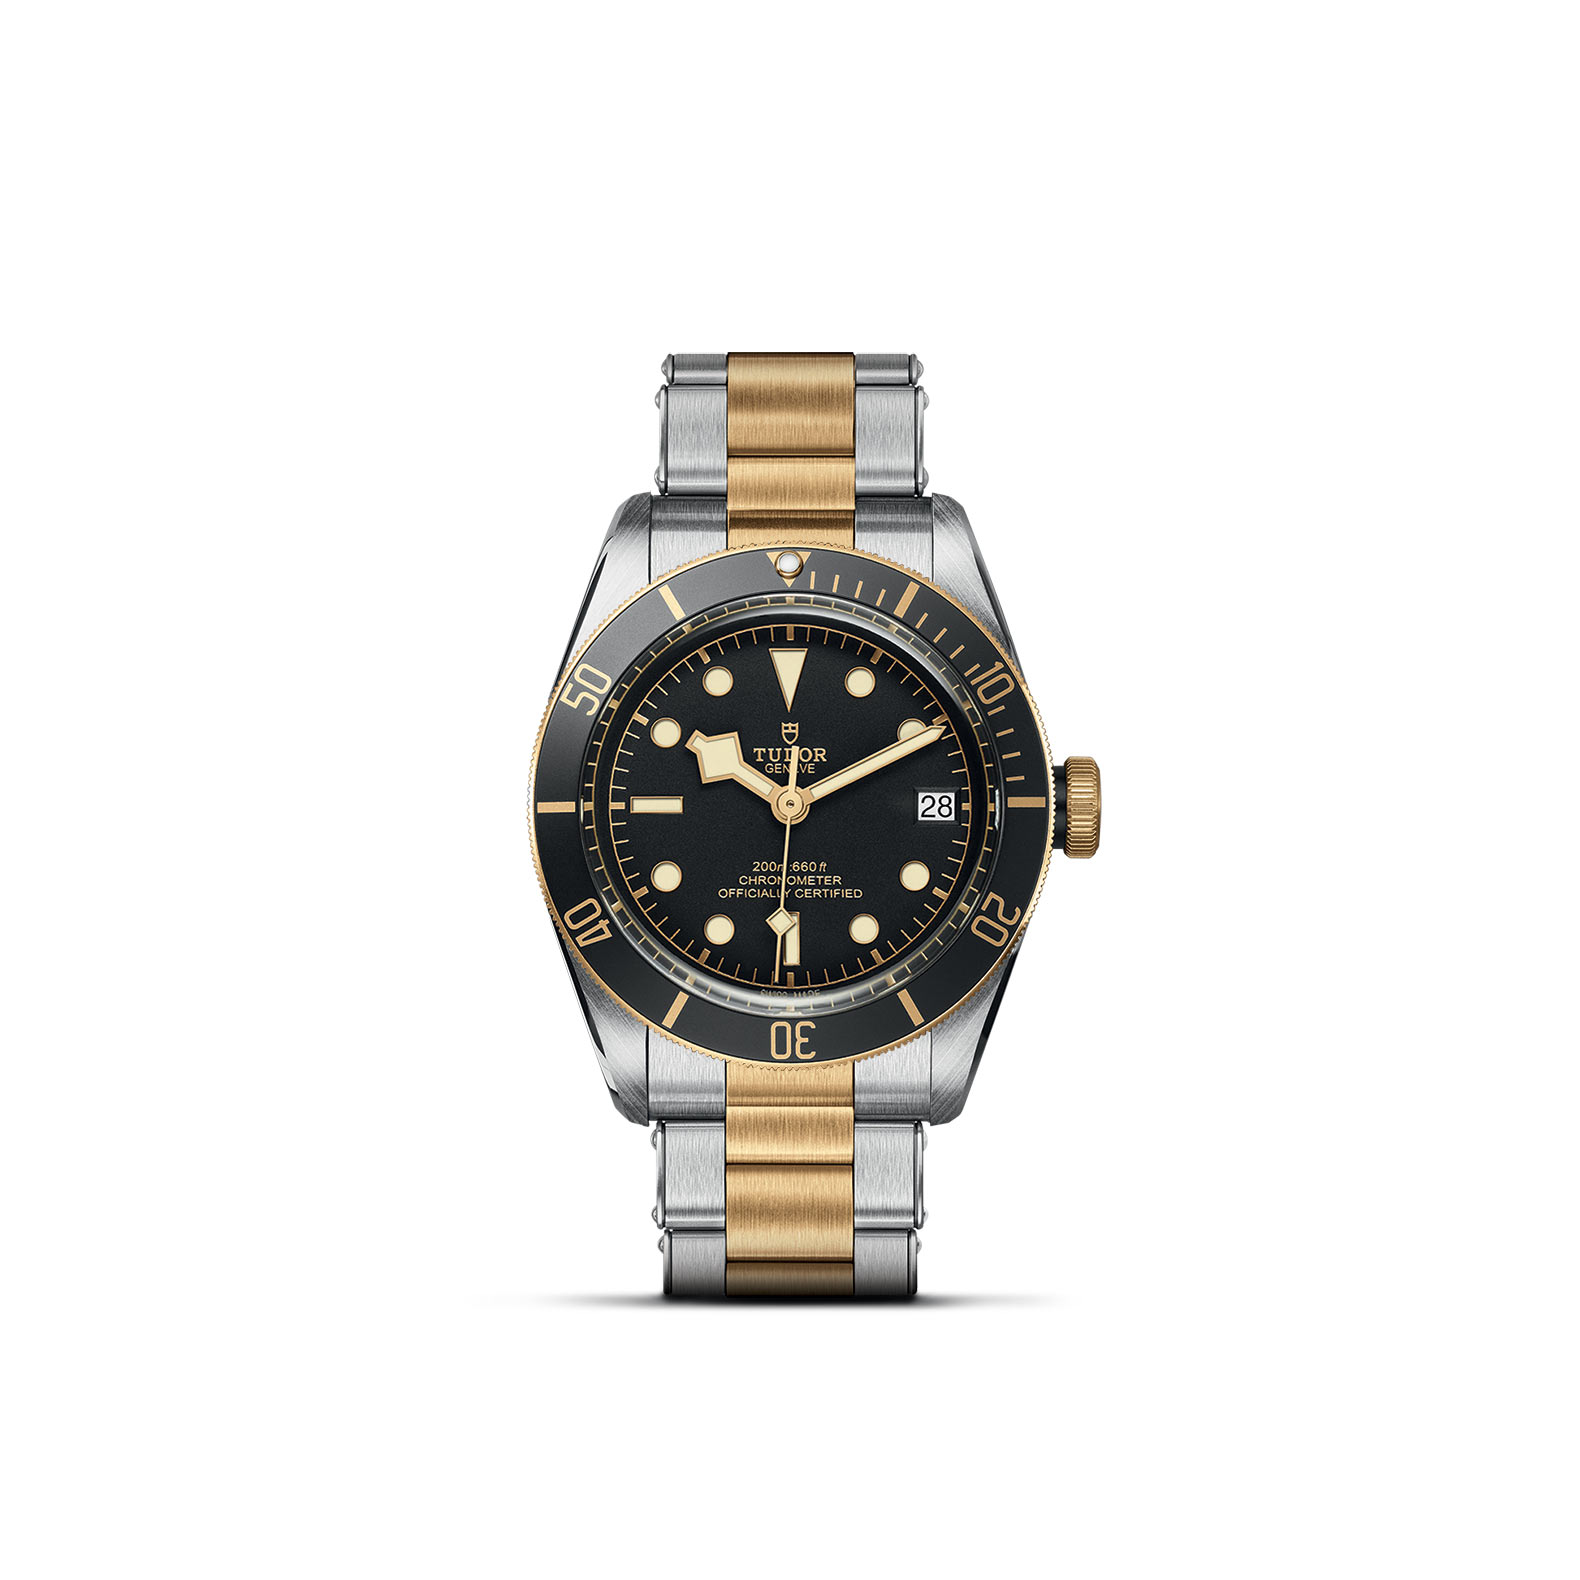 TUDOR BLACK BAY standing upright, highlighting its classic design against a white background.